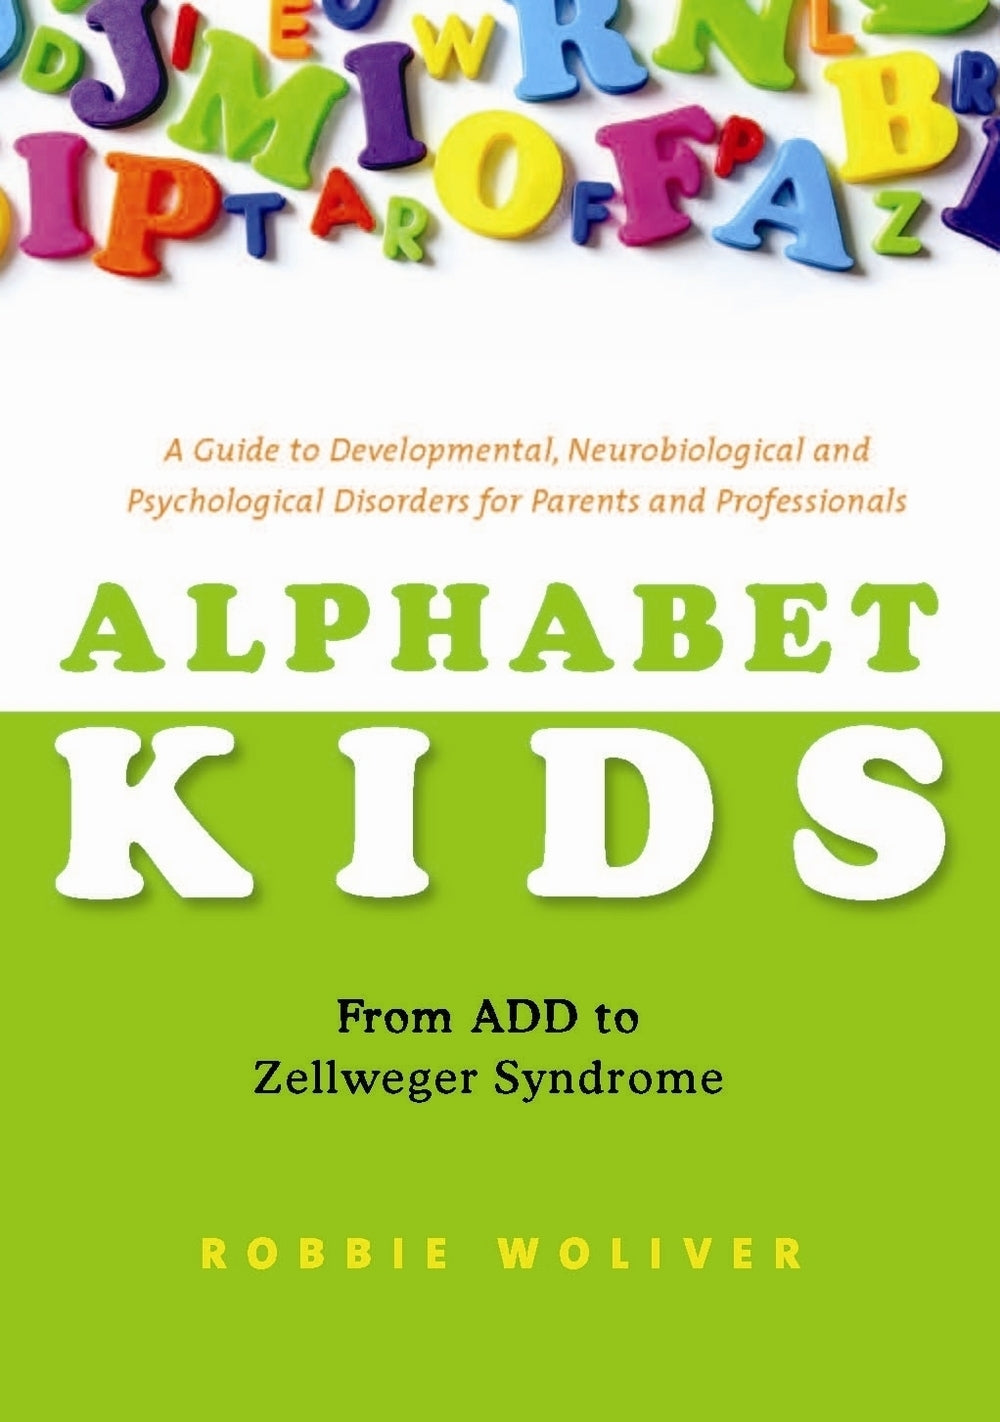 Alphabet Kids - From ADD to Zellweger Syndrome by Robbie Woliver